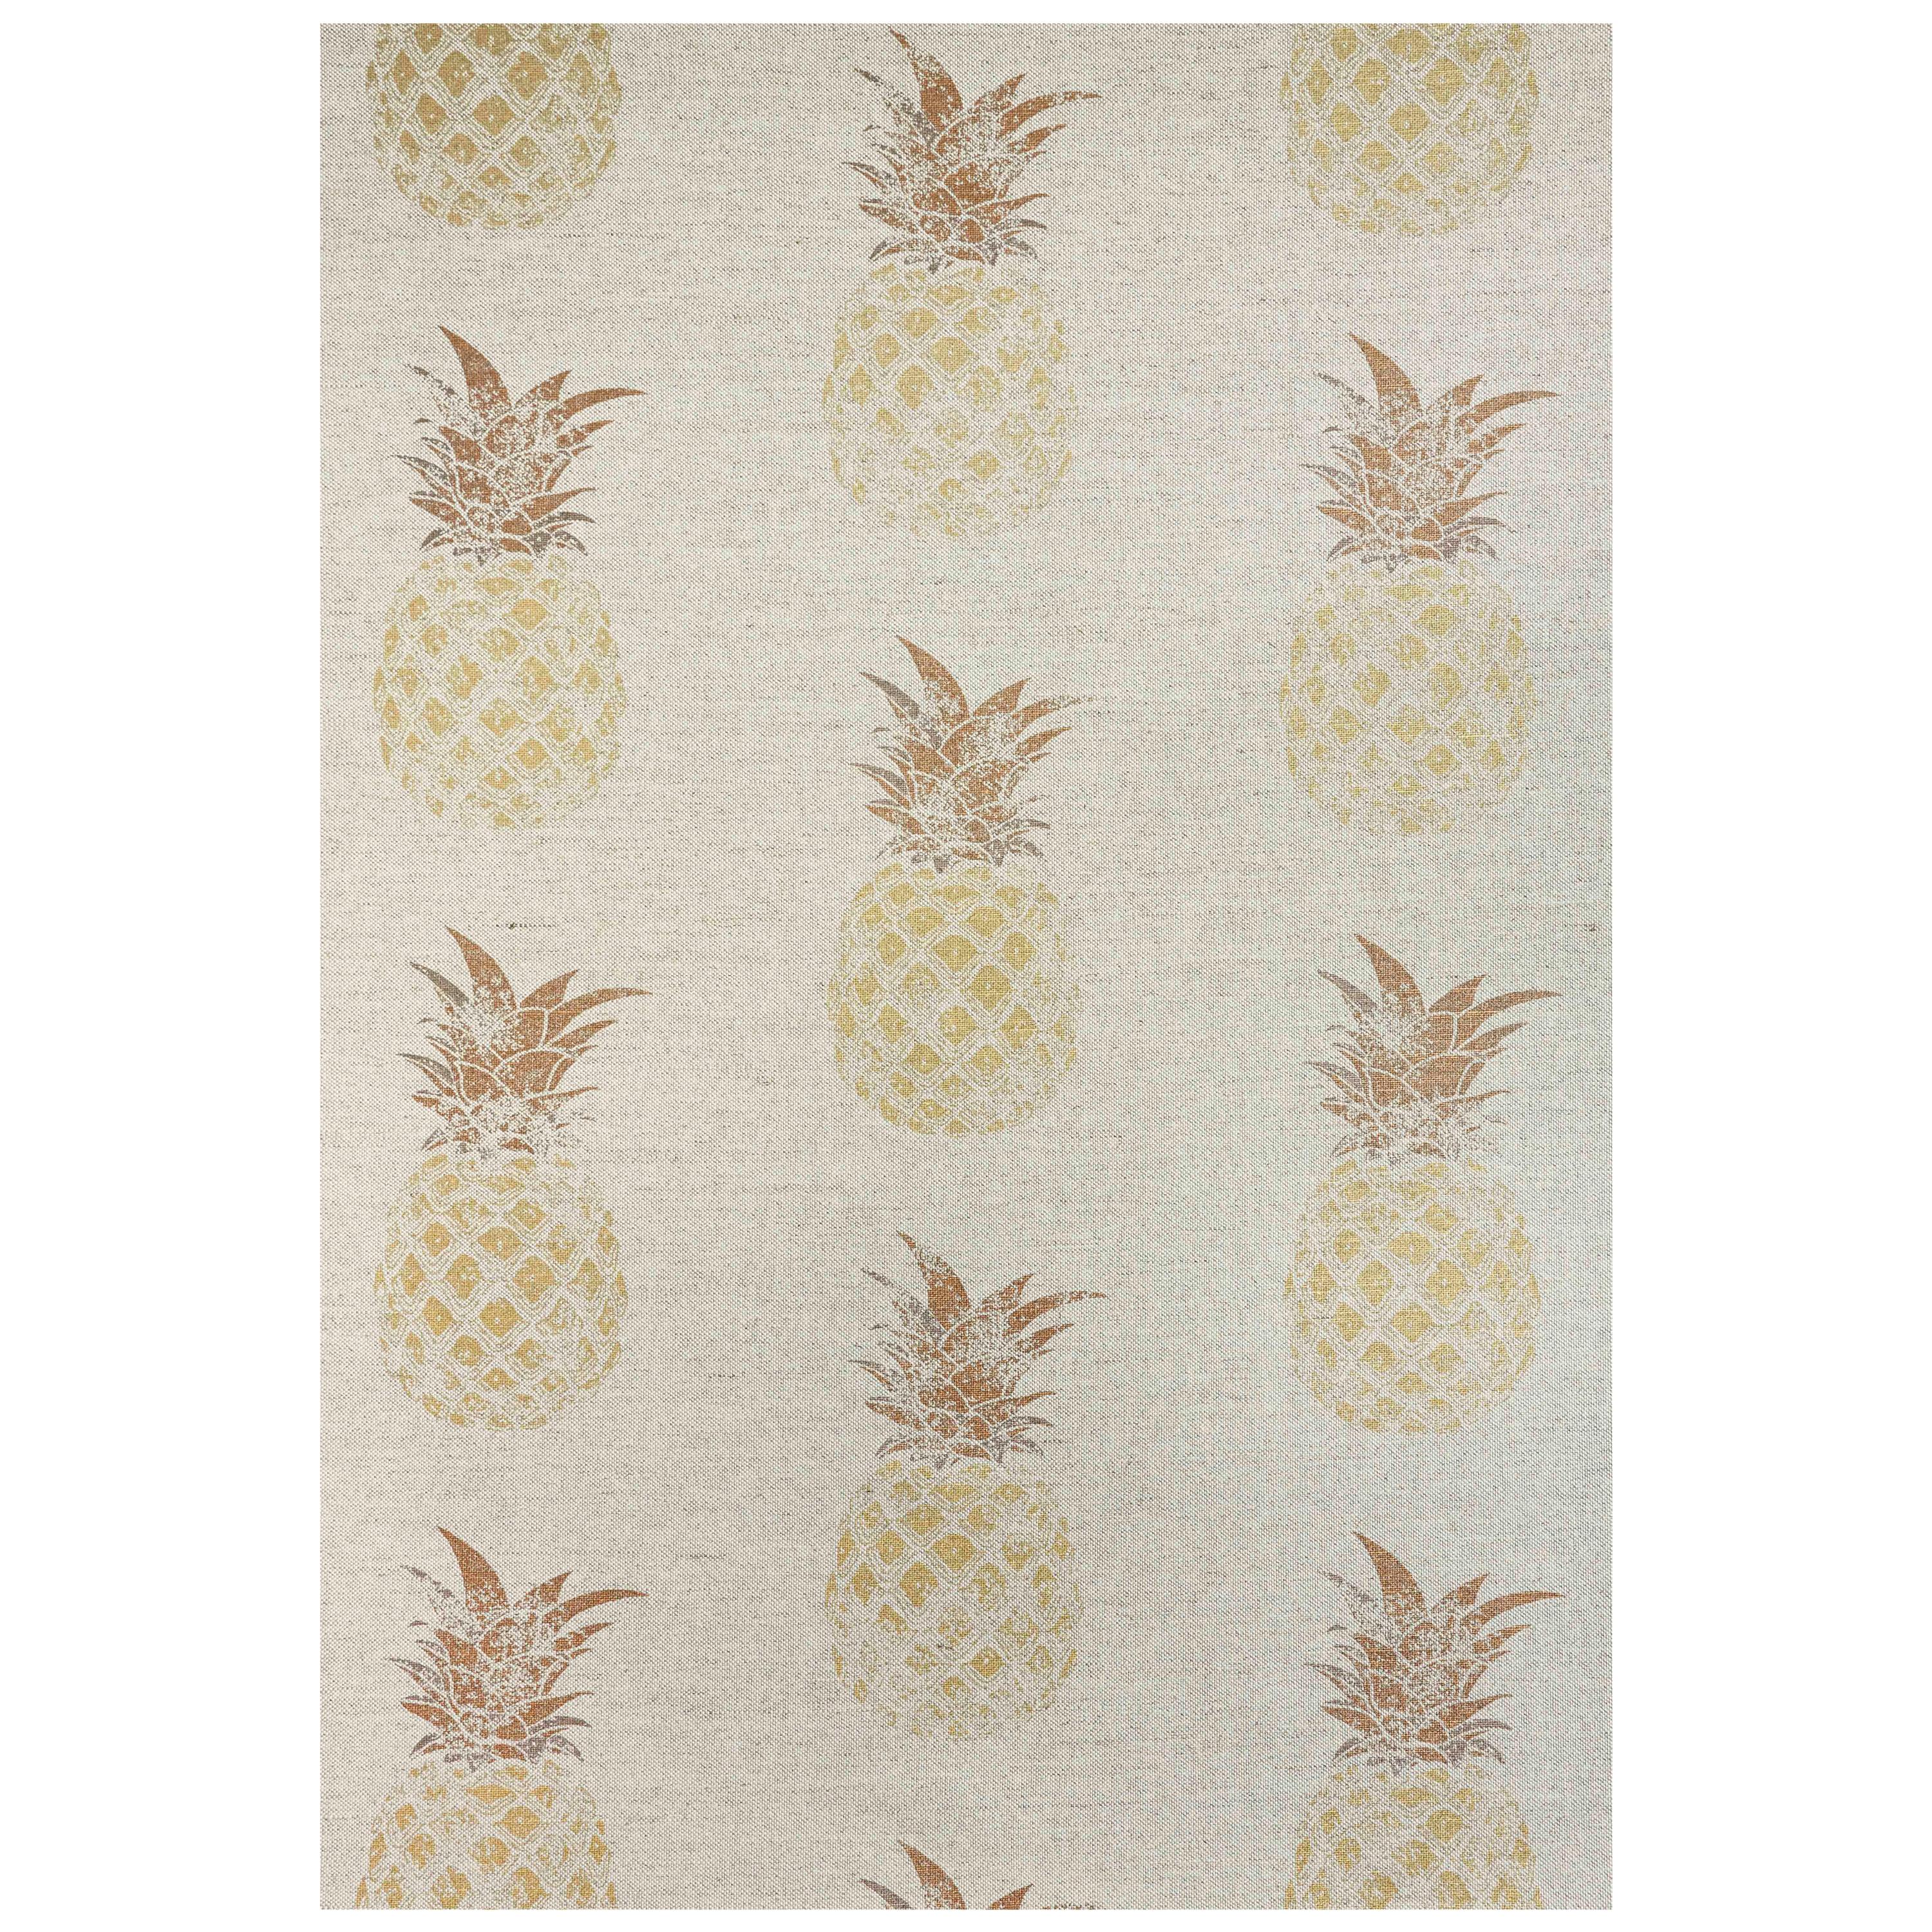 'Pineapple' Contemporary, Traditional Fabric in Gold on Natural im Angebot